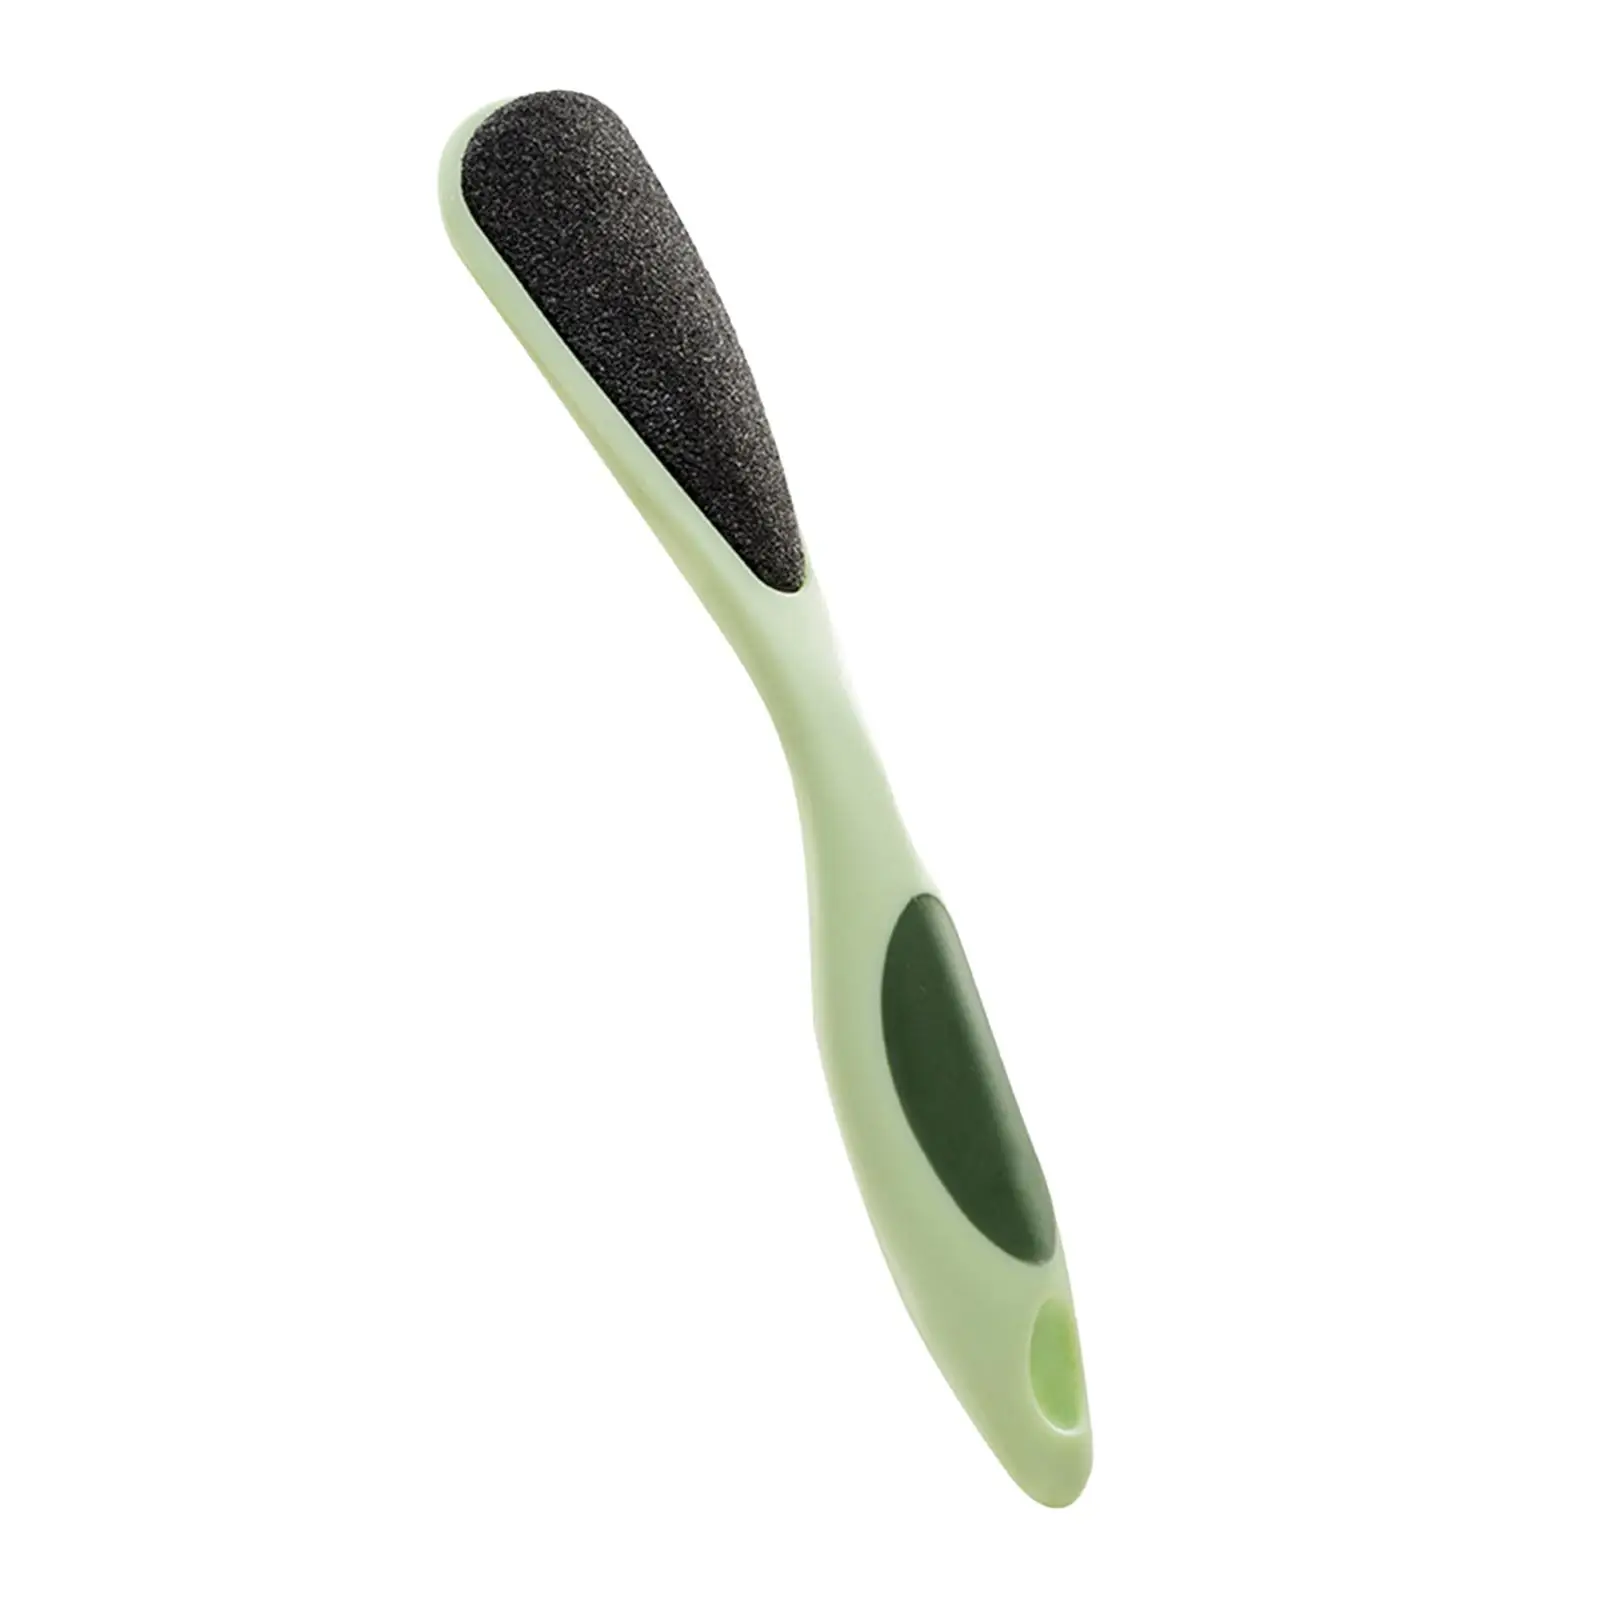 Foot File Professional Replacement Reusable for Outgoing Sport Enthusiasts